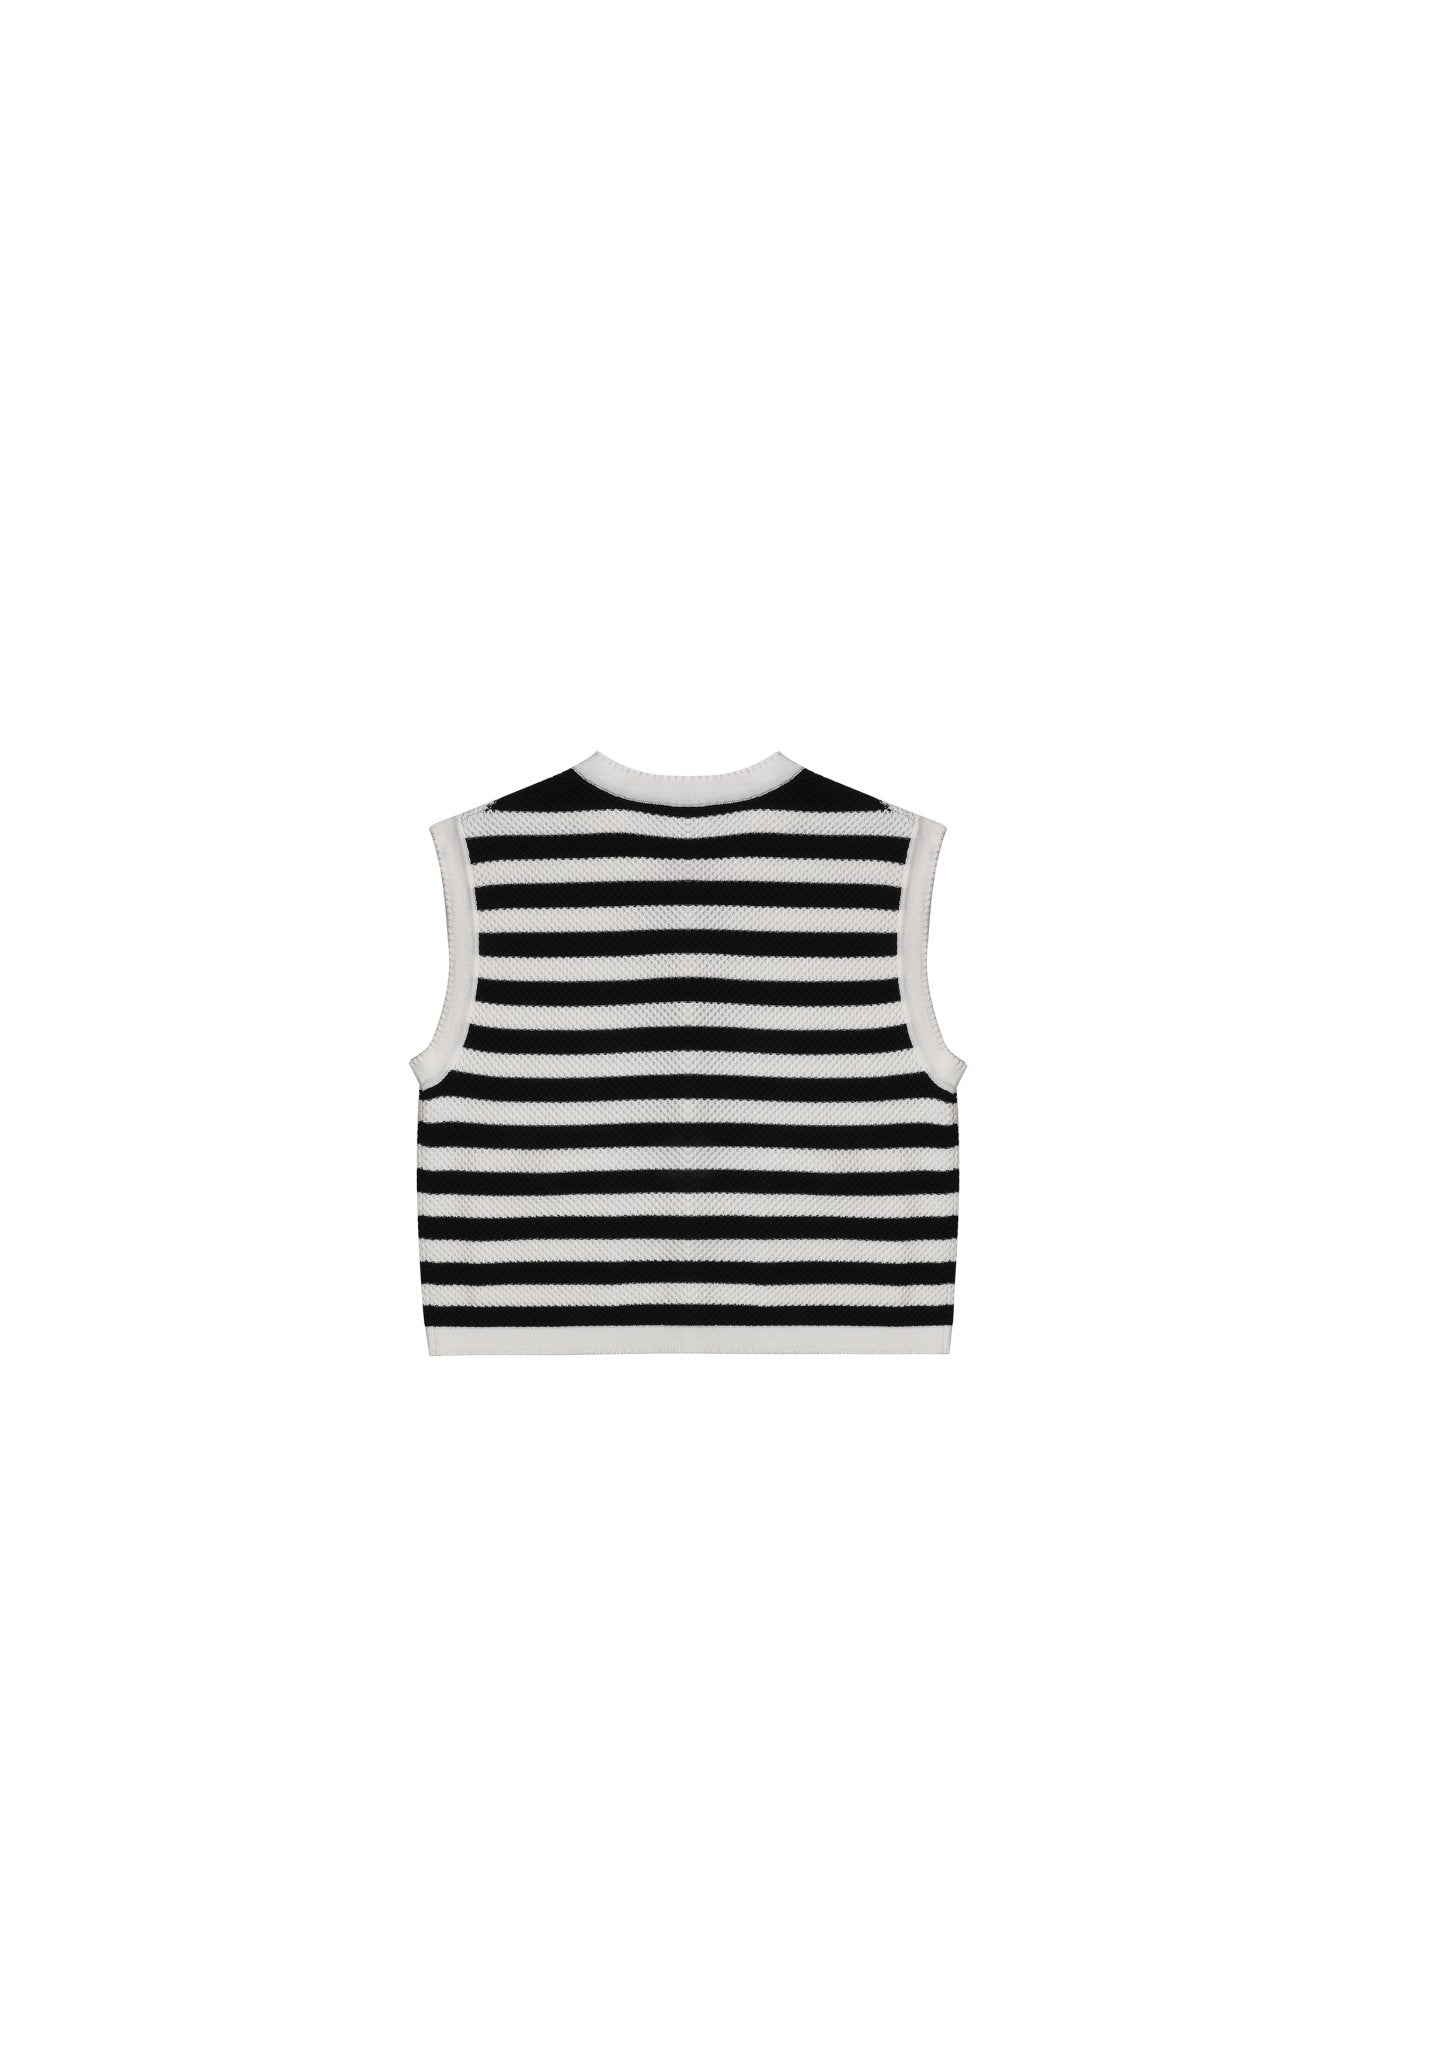 RYRANYI Striped Vest In Black and Whte | MADA IN CHINA